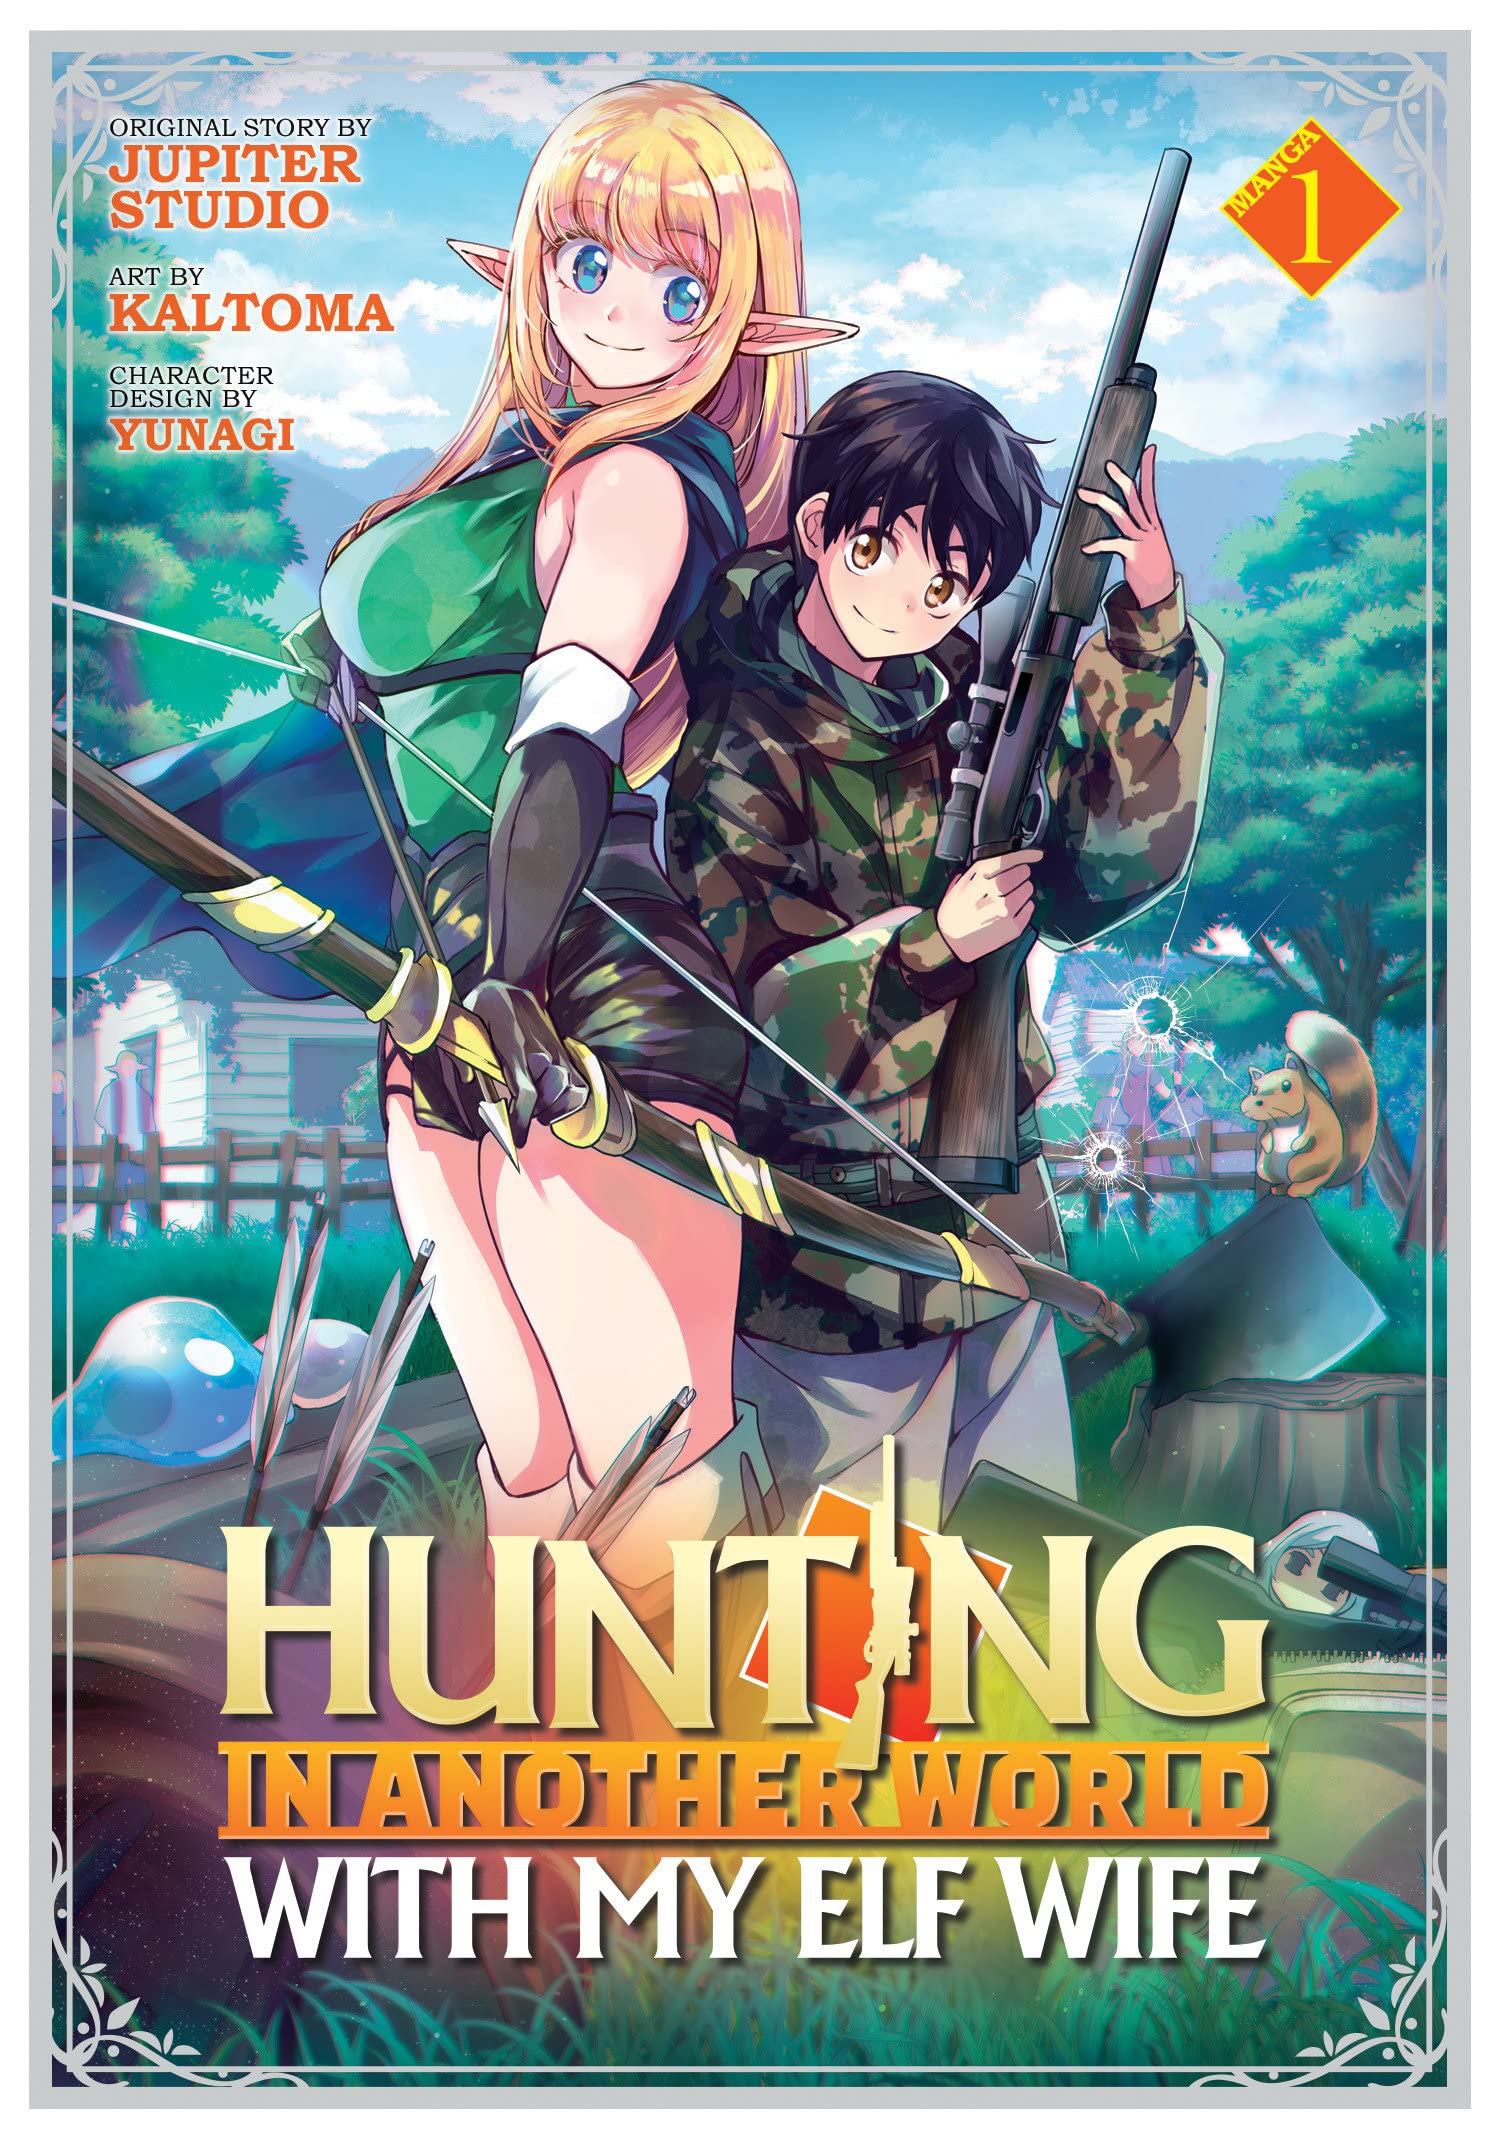 Hunting in Another World with My Elf Wife (Manga) Vol. 01